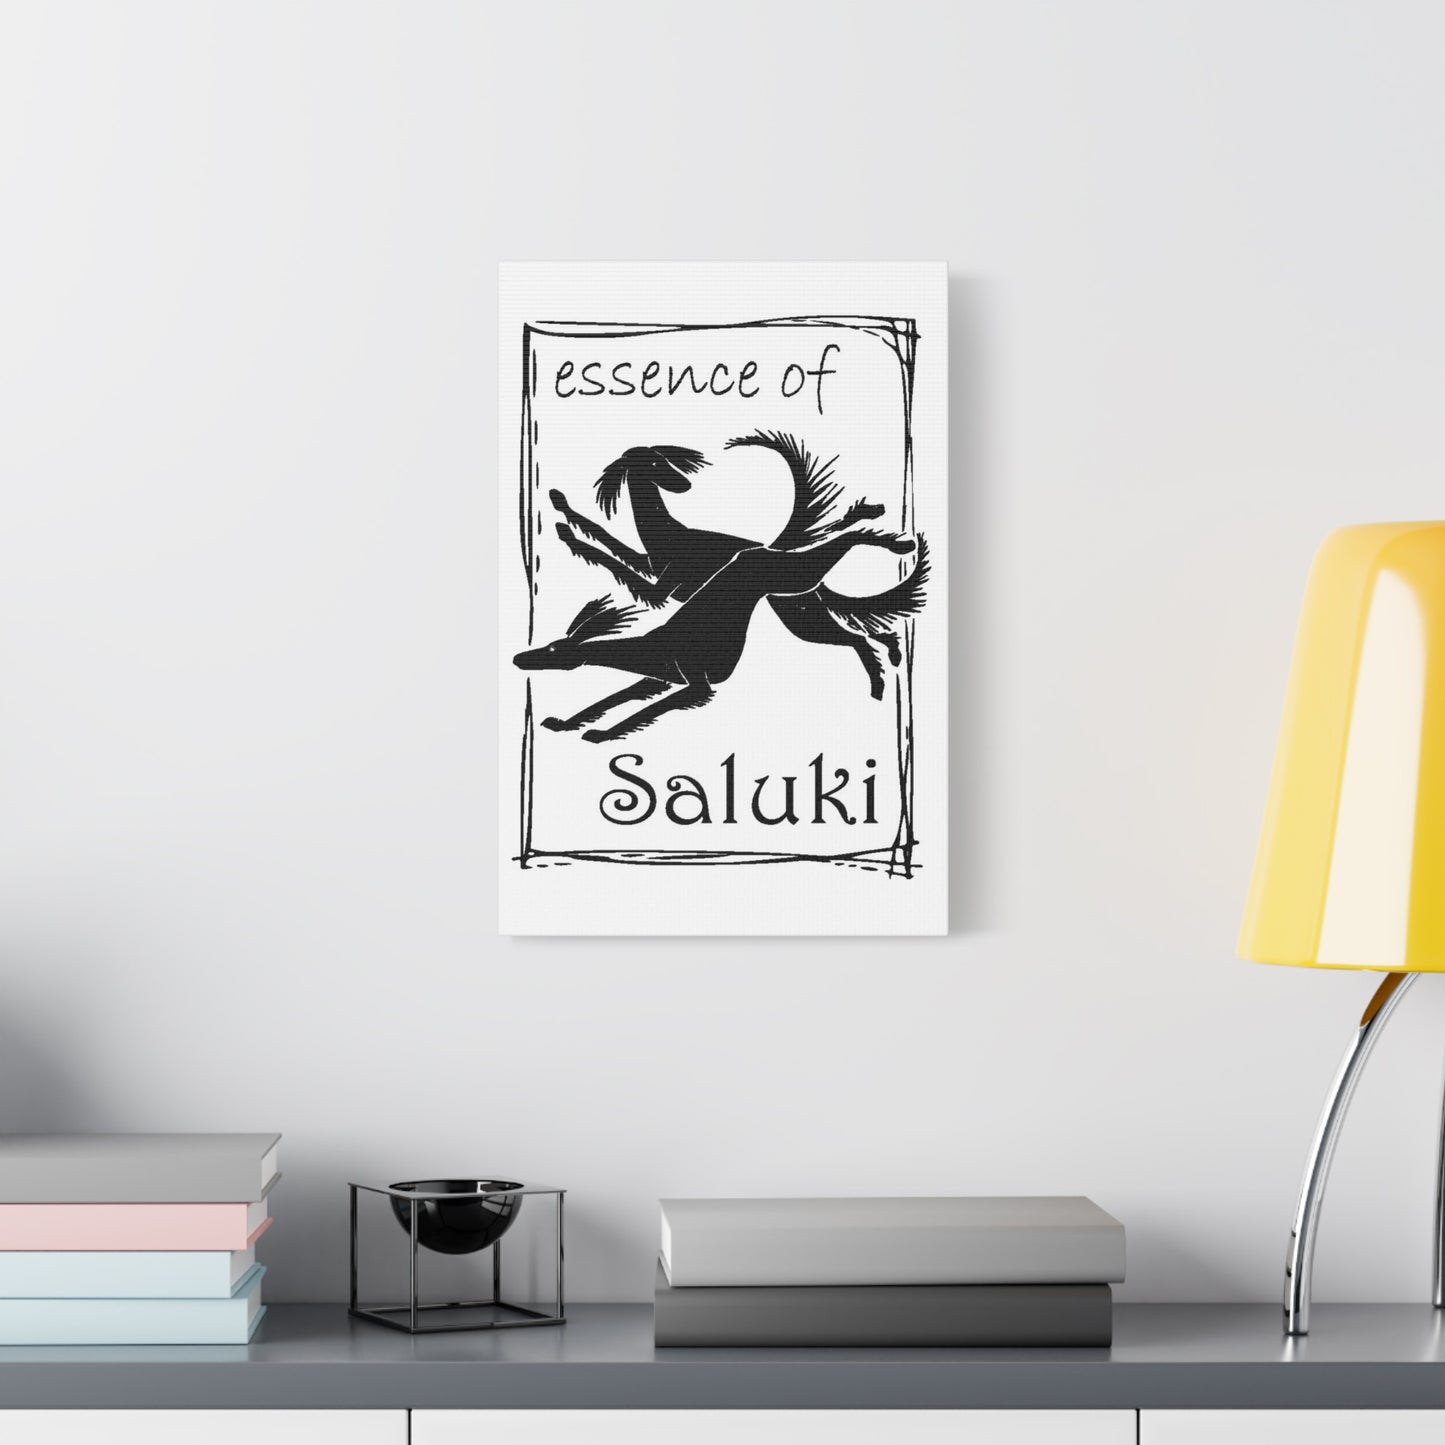 SALUKI ART IN DISTRESSED ART STYLE on a Matte Canvas, Stretched, 1.25"